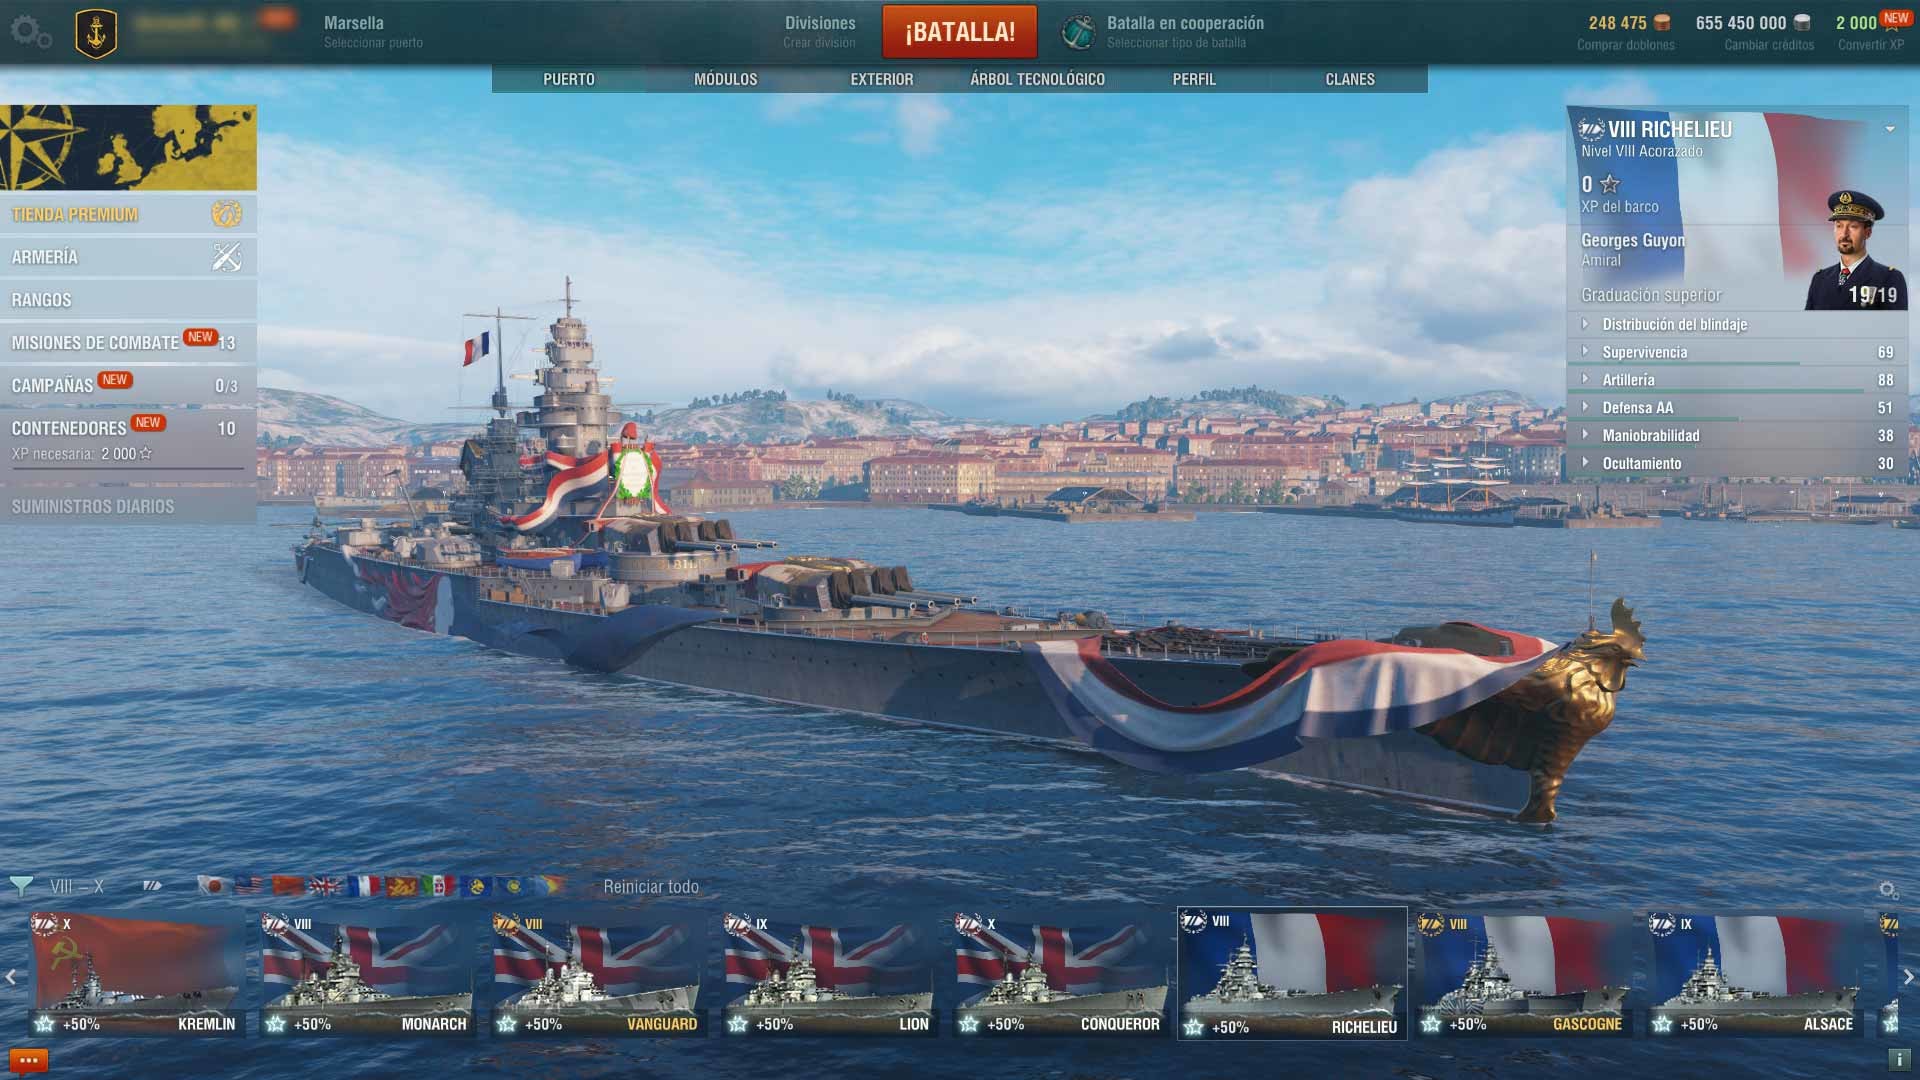 world of warships steam login with wargaming account